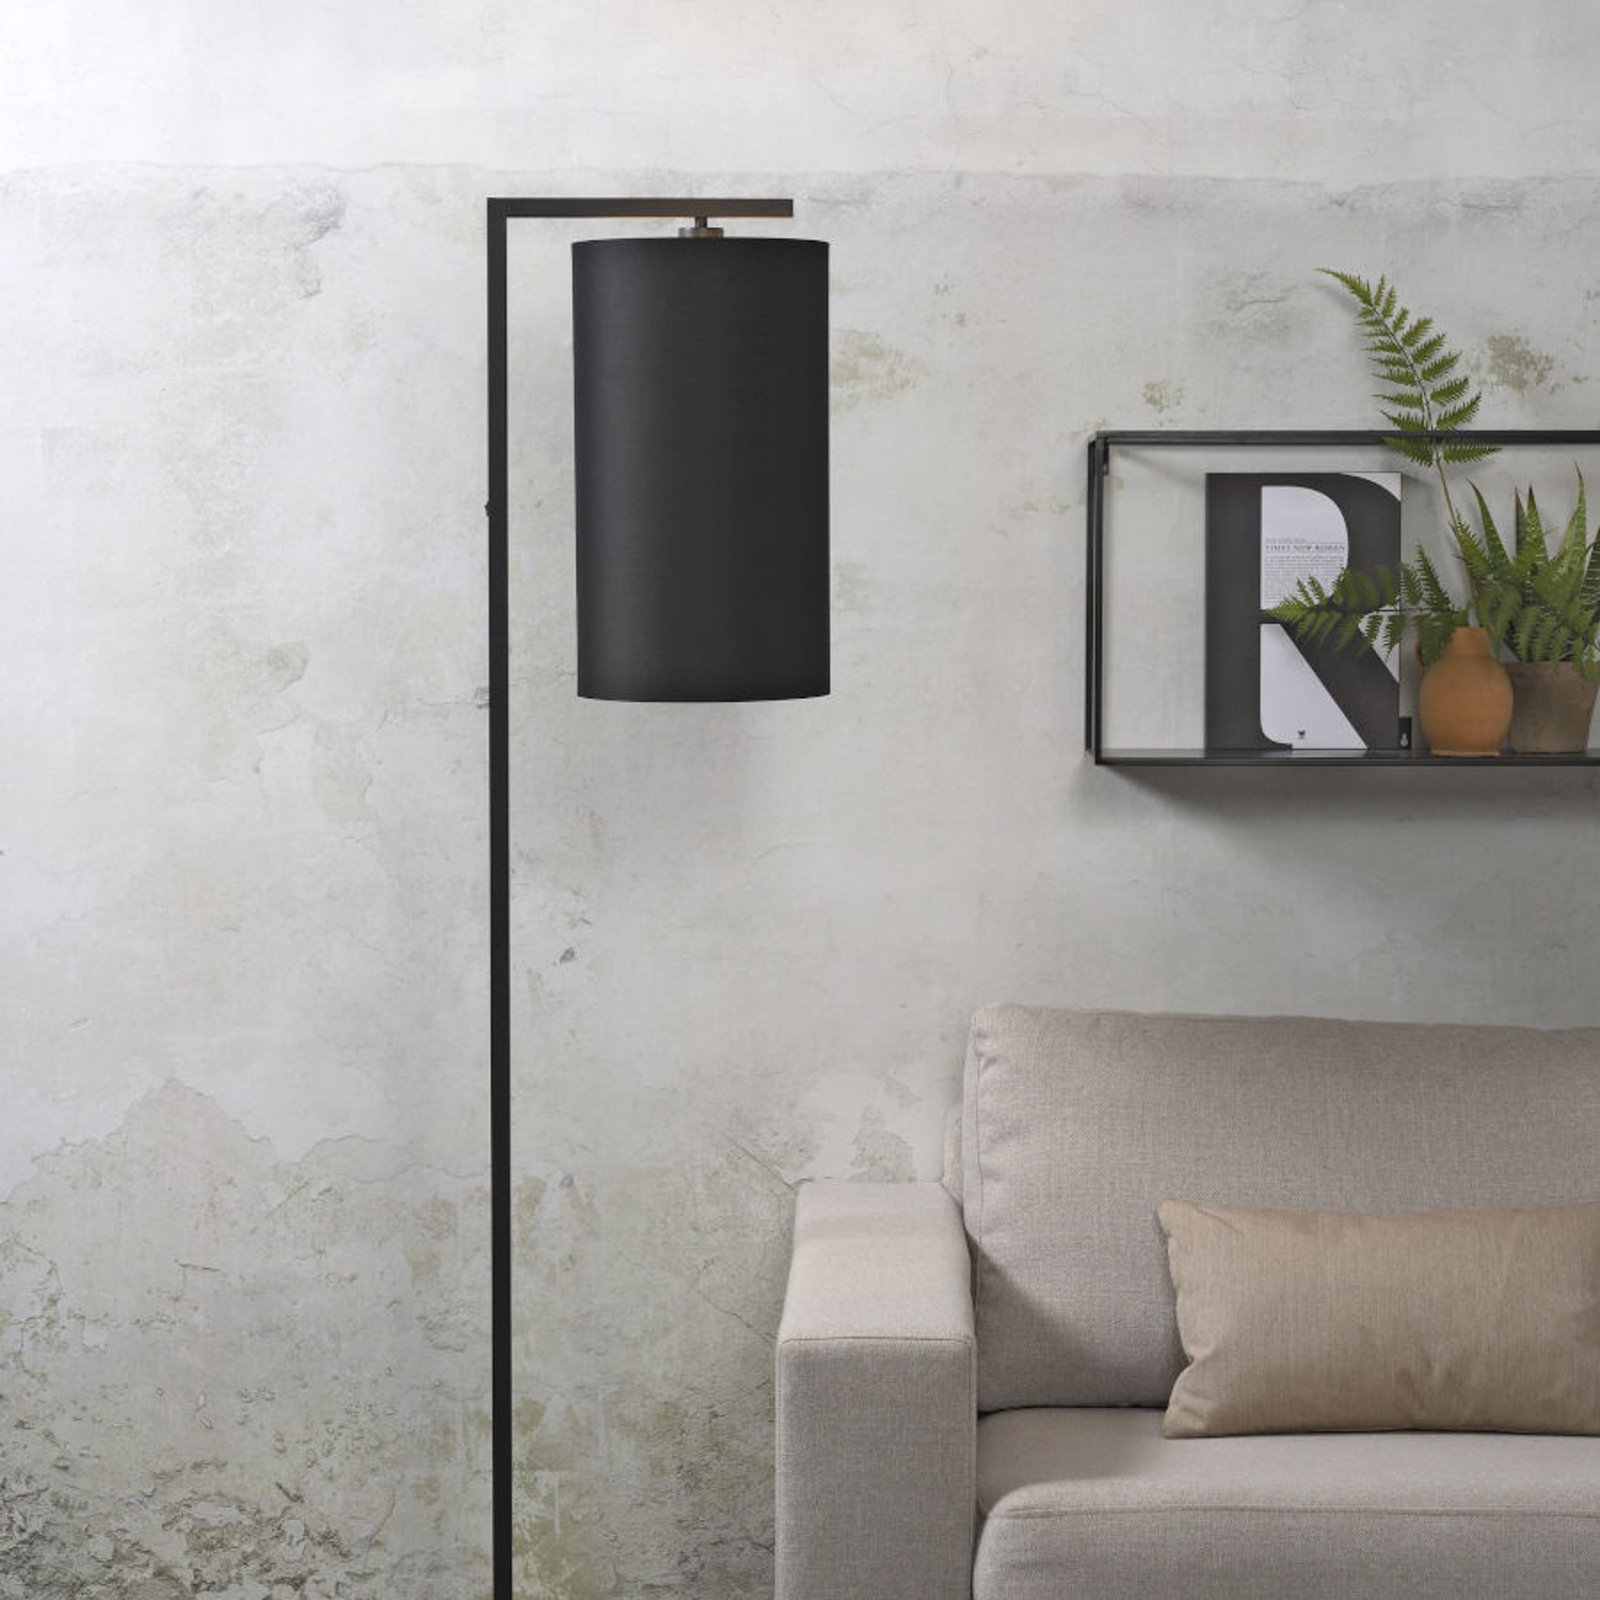 It's about RoMi Boston, lampshade long, black